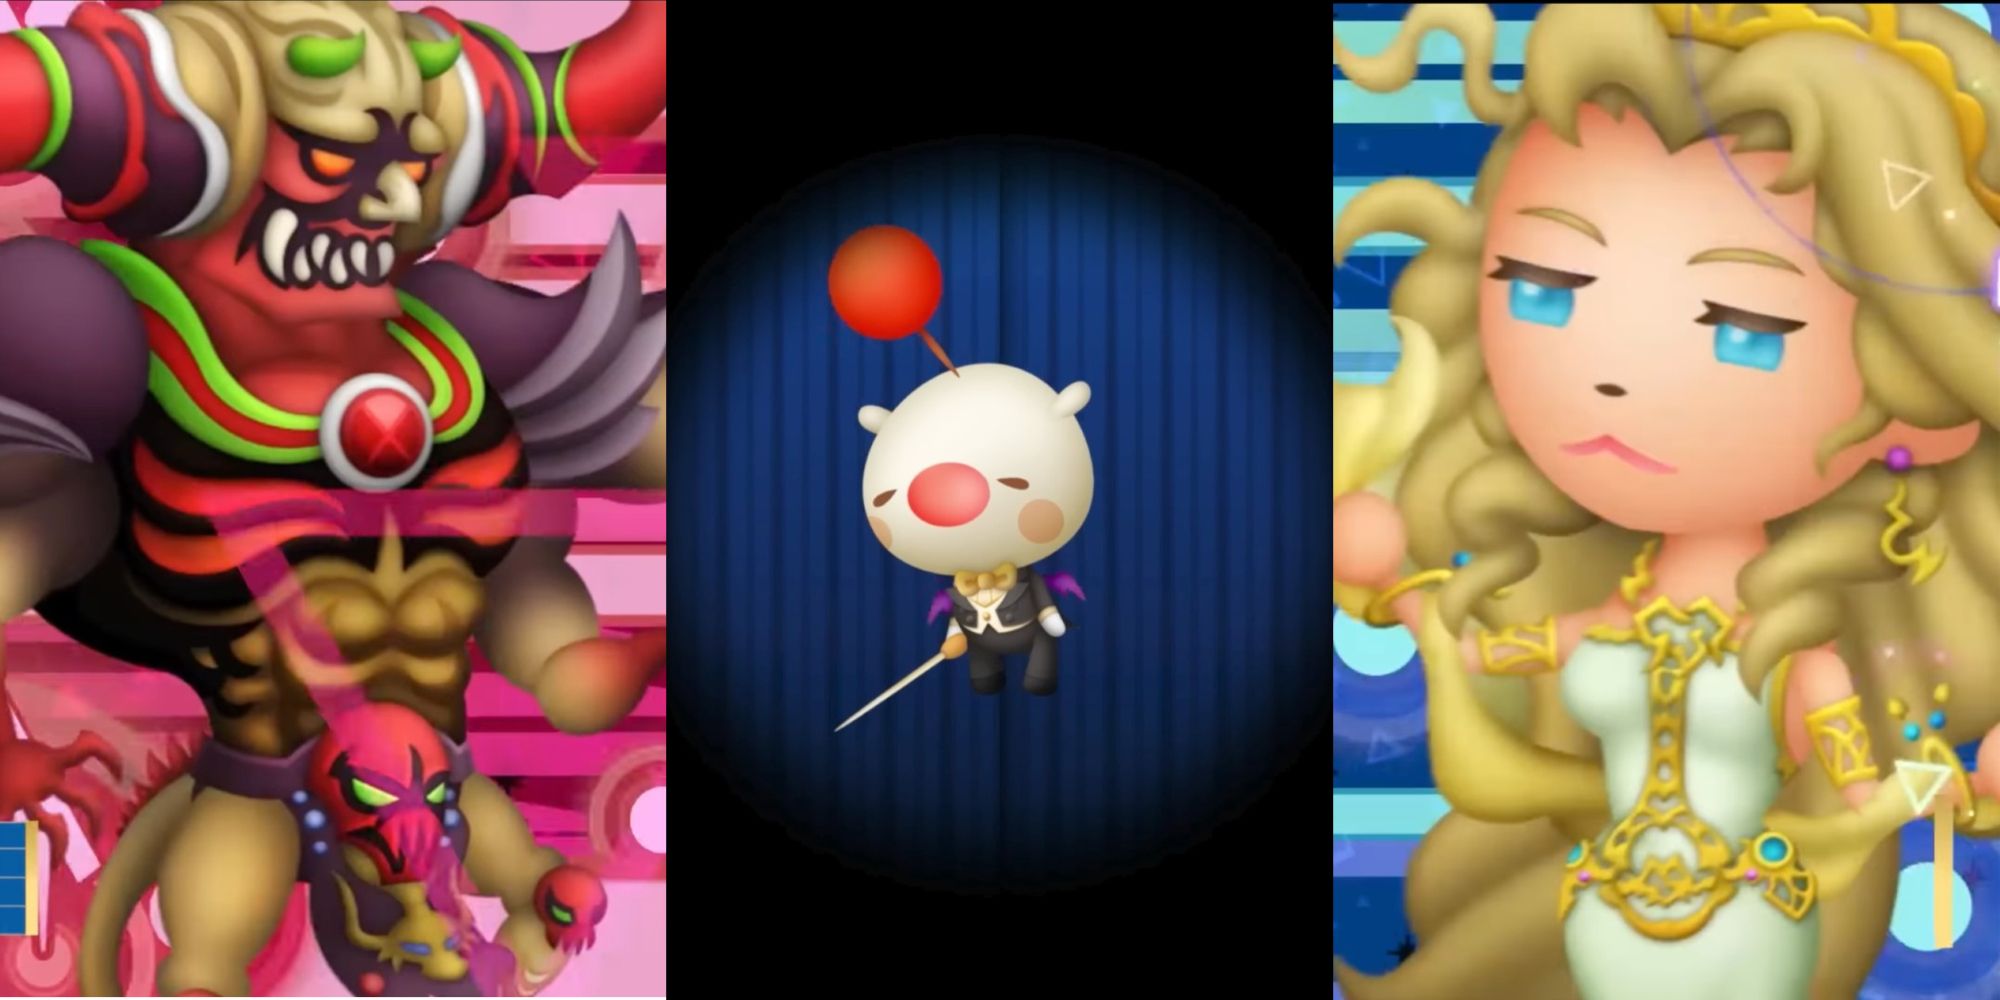 Chaos on the left, Moogle in the middle, Cosmos on the right